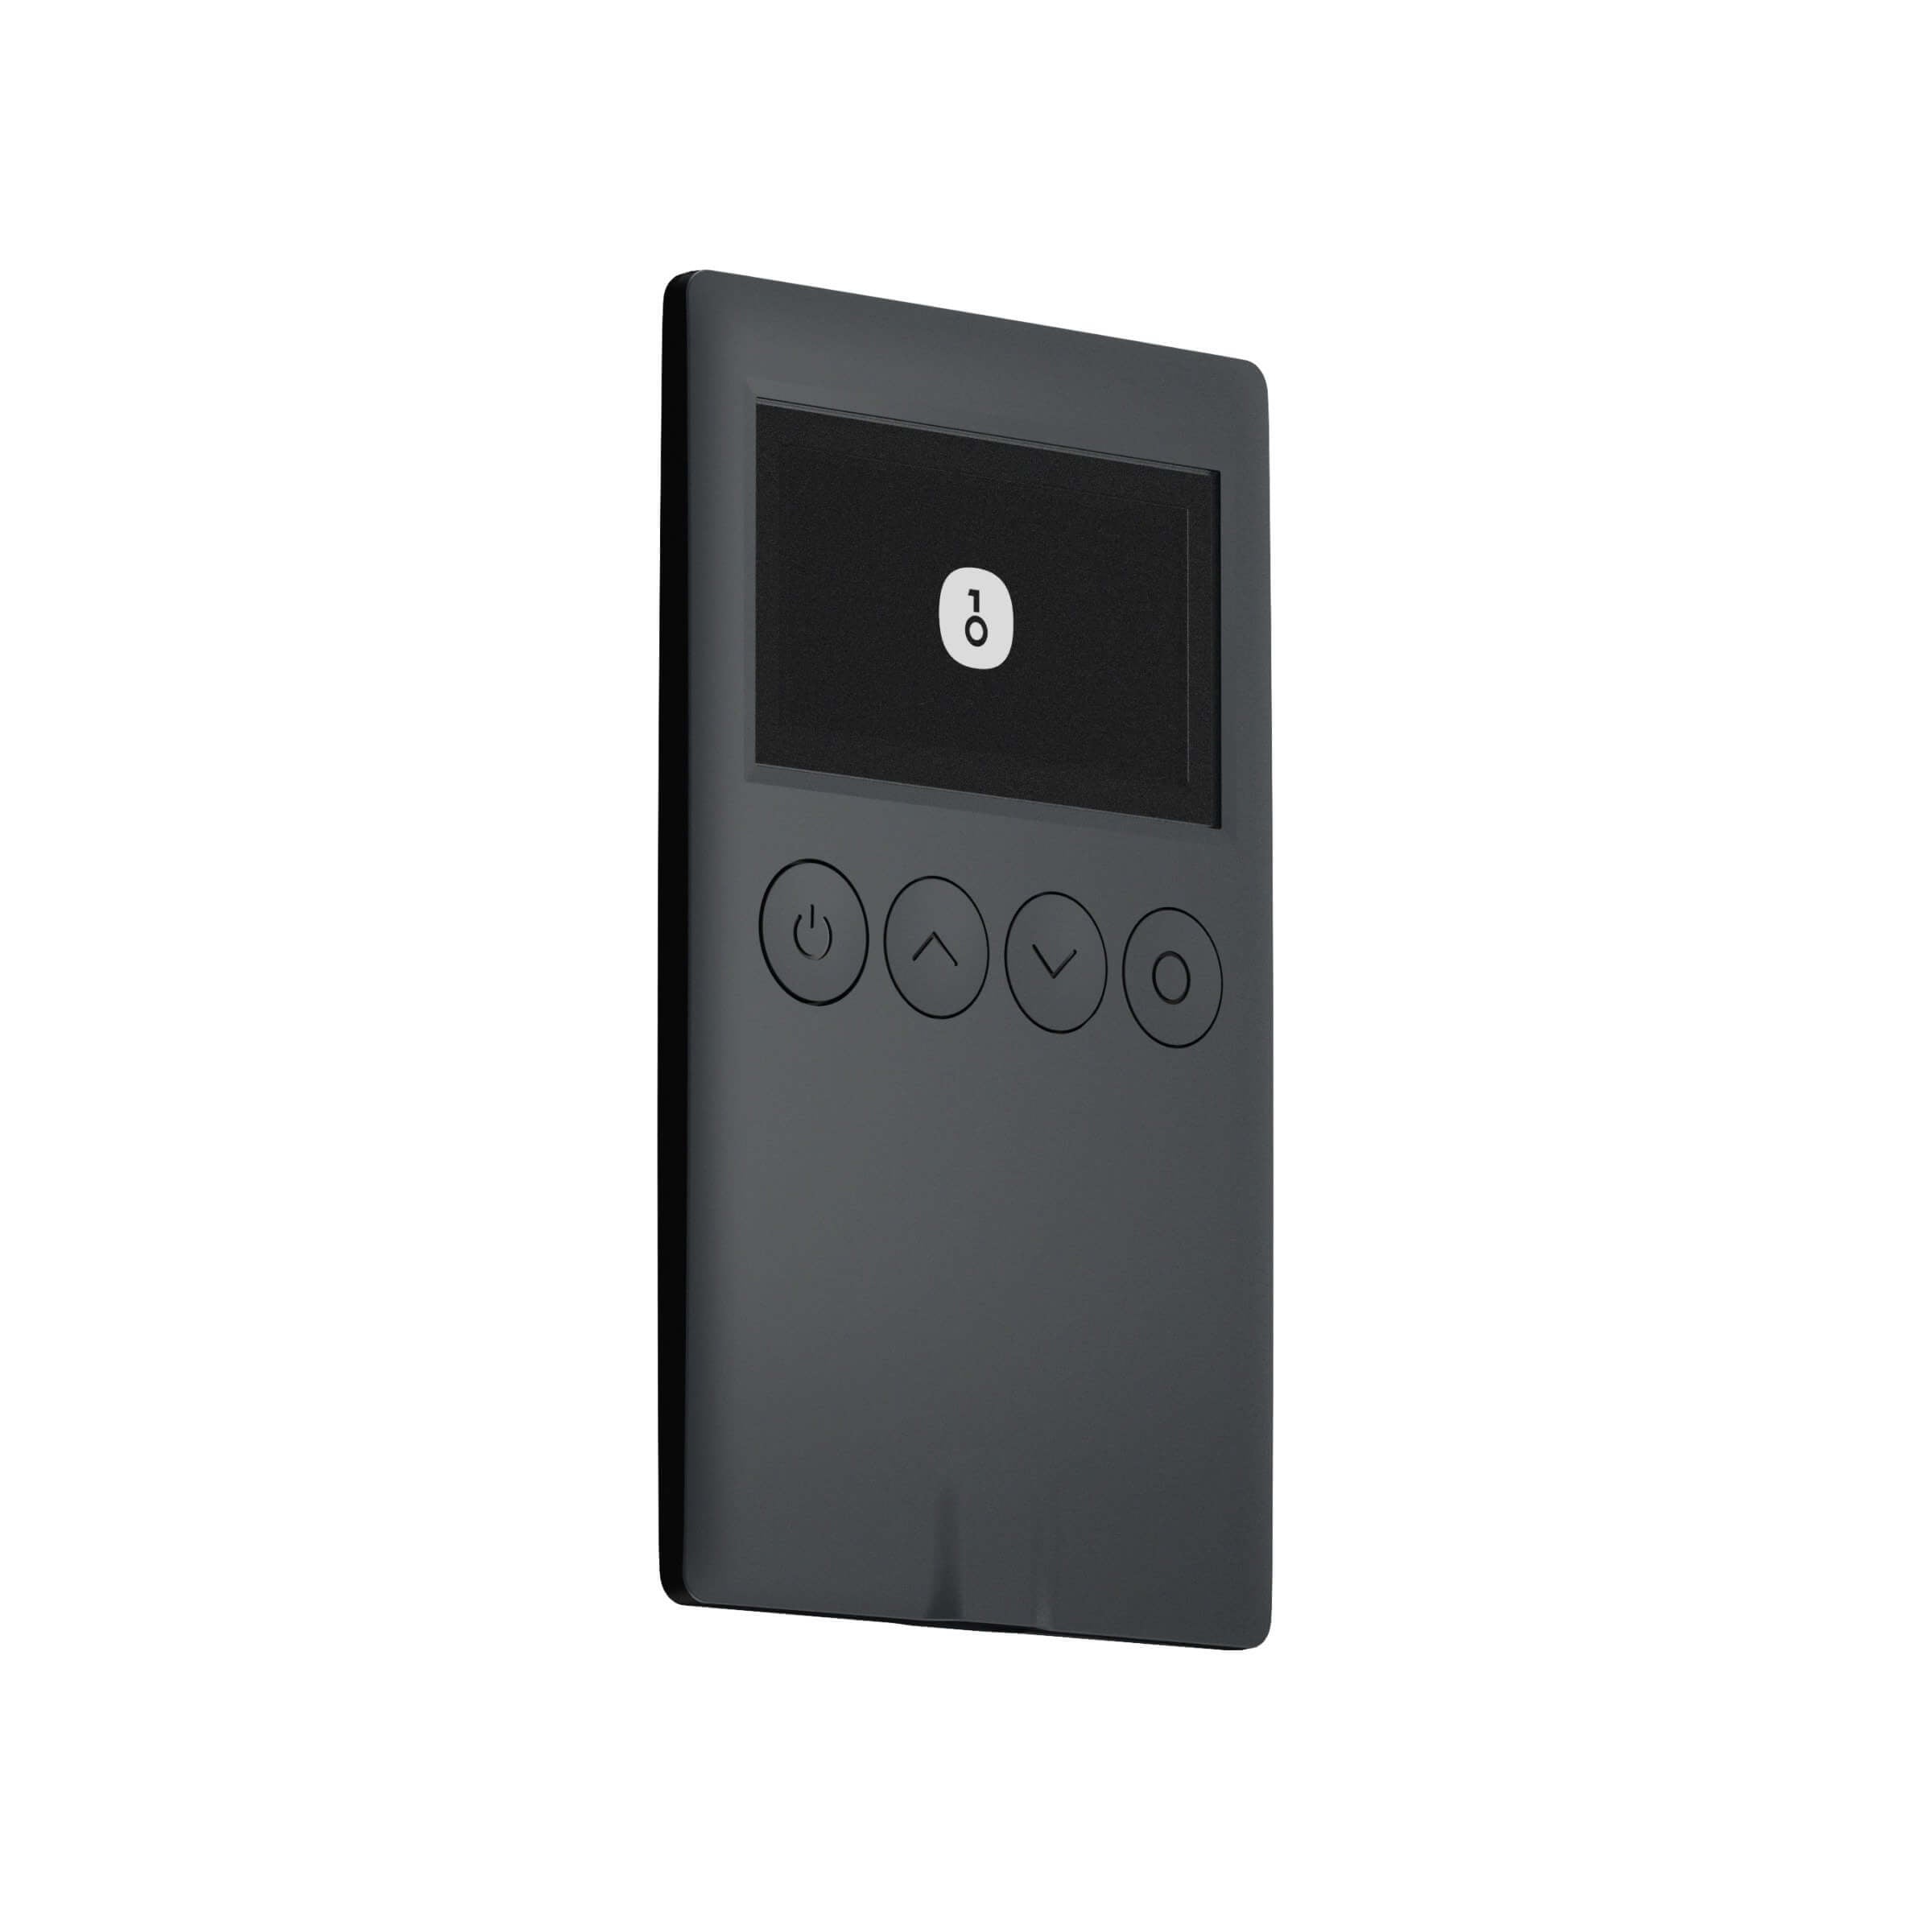 A black OneKey Classic crypto hardware wallet with buttons on it. The product is rotated slightly horizontally to show the edge.